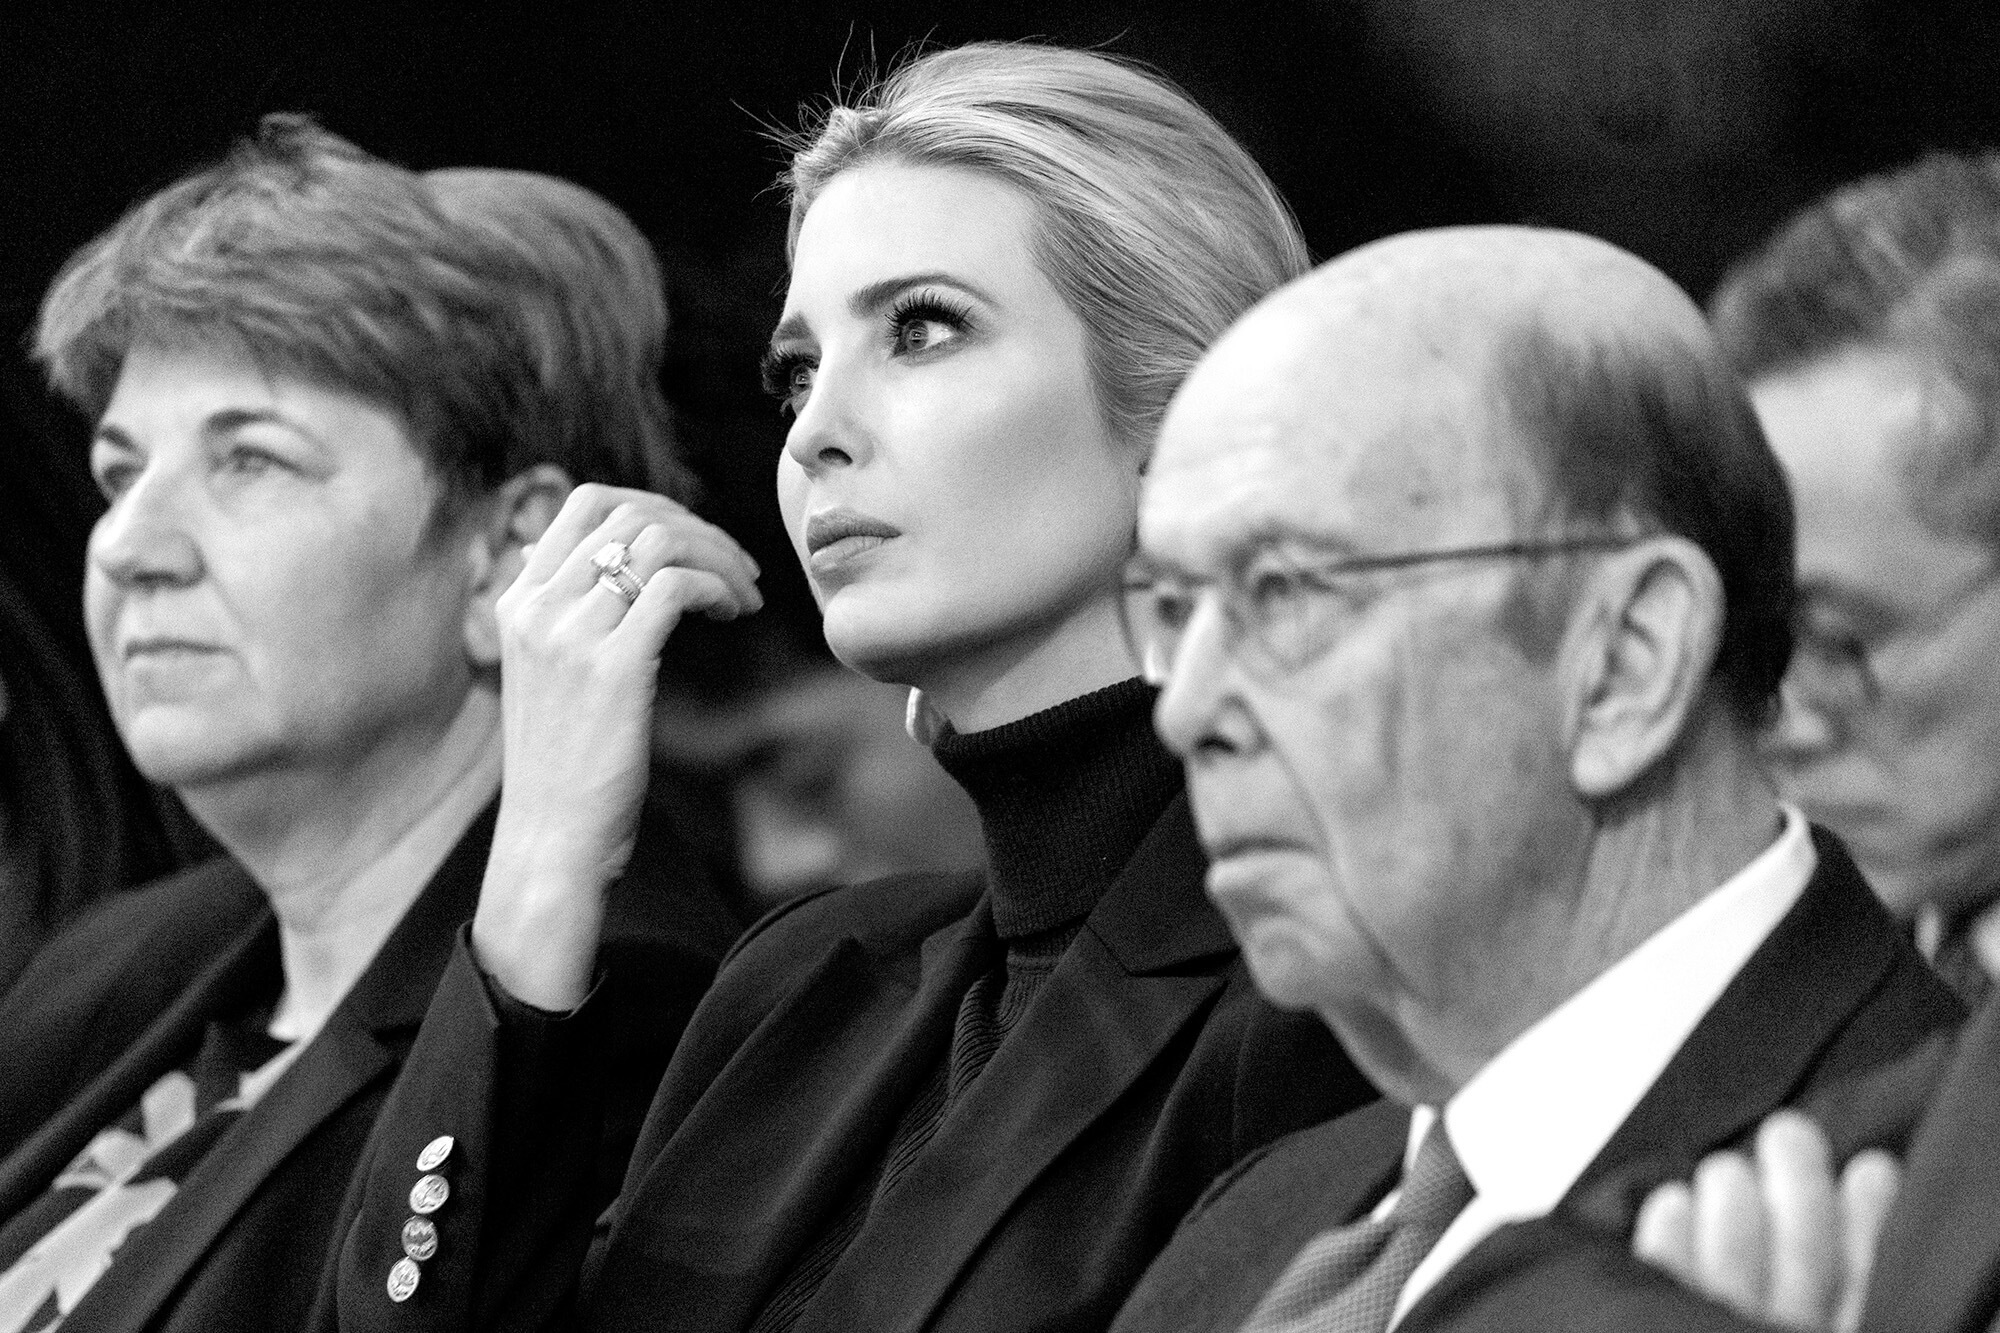 The fact that Ivanka Trump and Jared Kushner did not take government salaries while serving in the White House did not keep them from enriching themselves while holding public office.